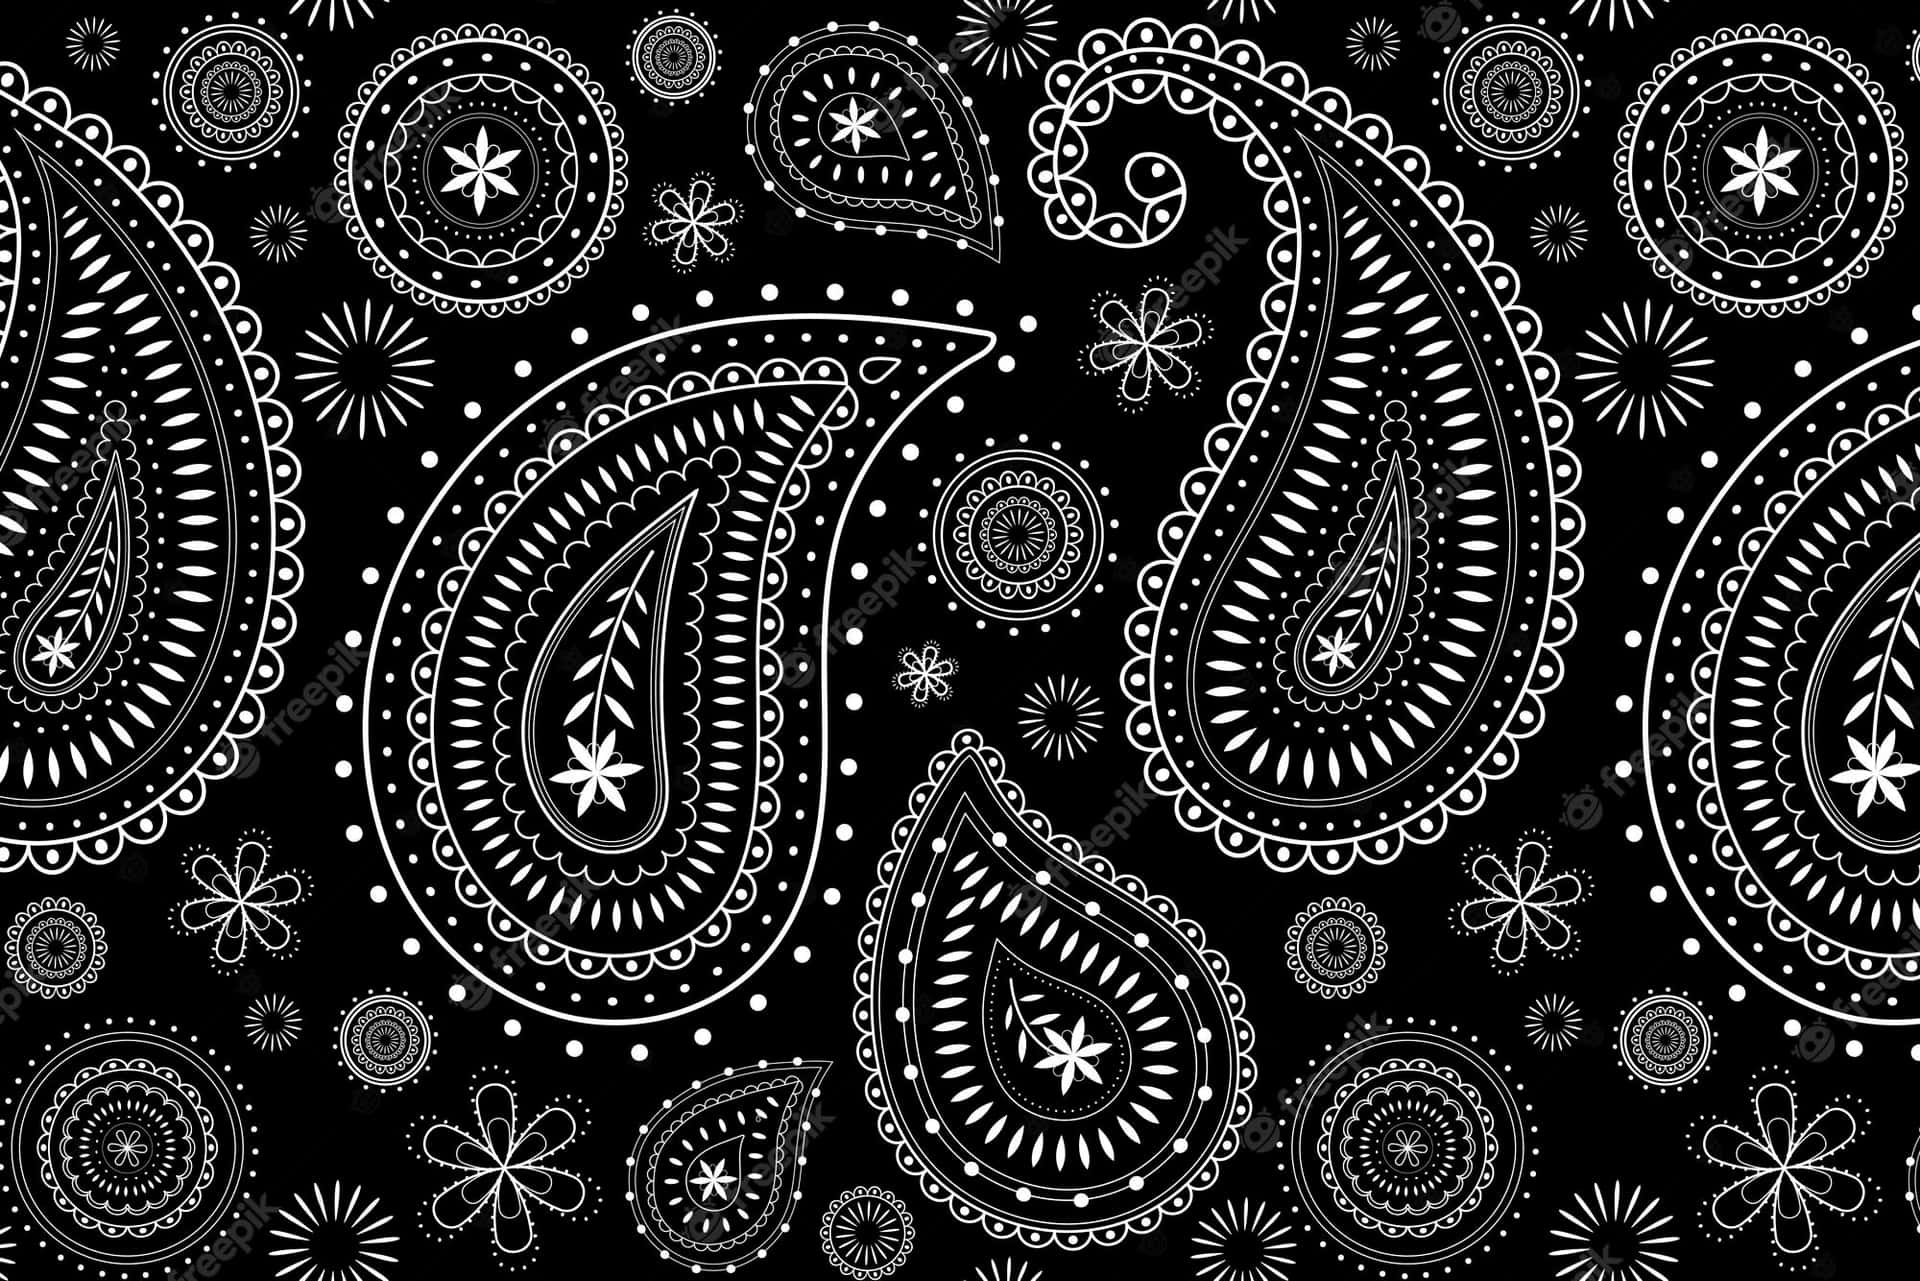 [100+] Black Pattern Backgrounds | Wallpapers.com